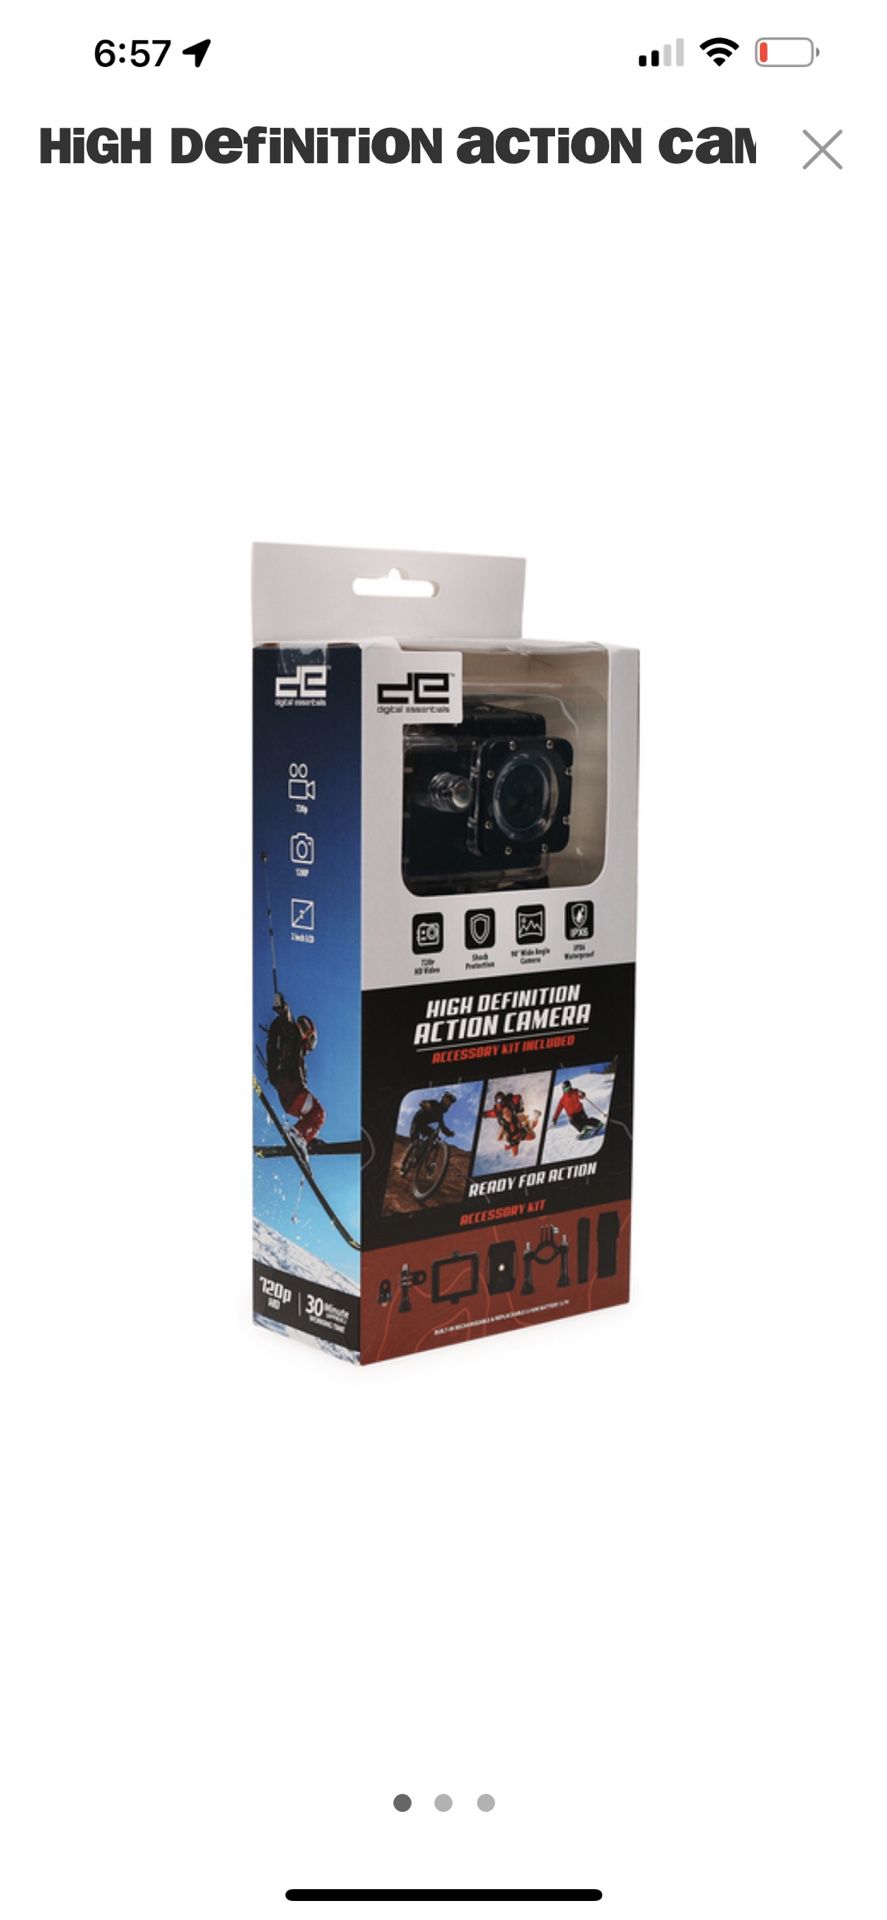 HIGH DEFINITION ACTION CAMERA (like GoPro)